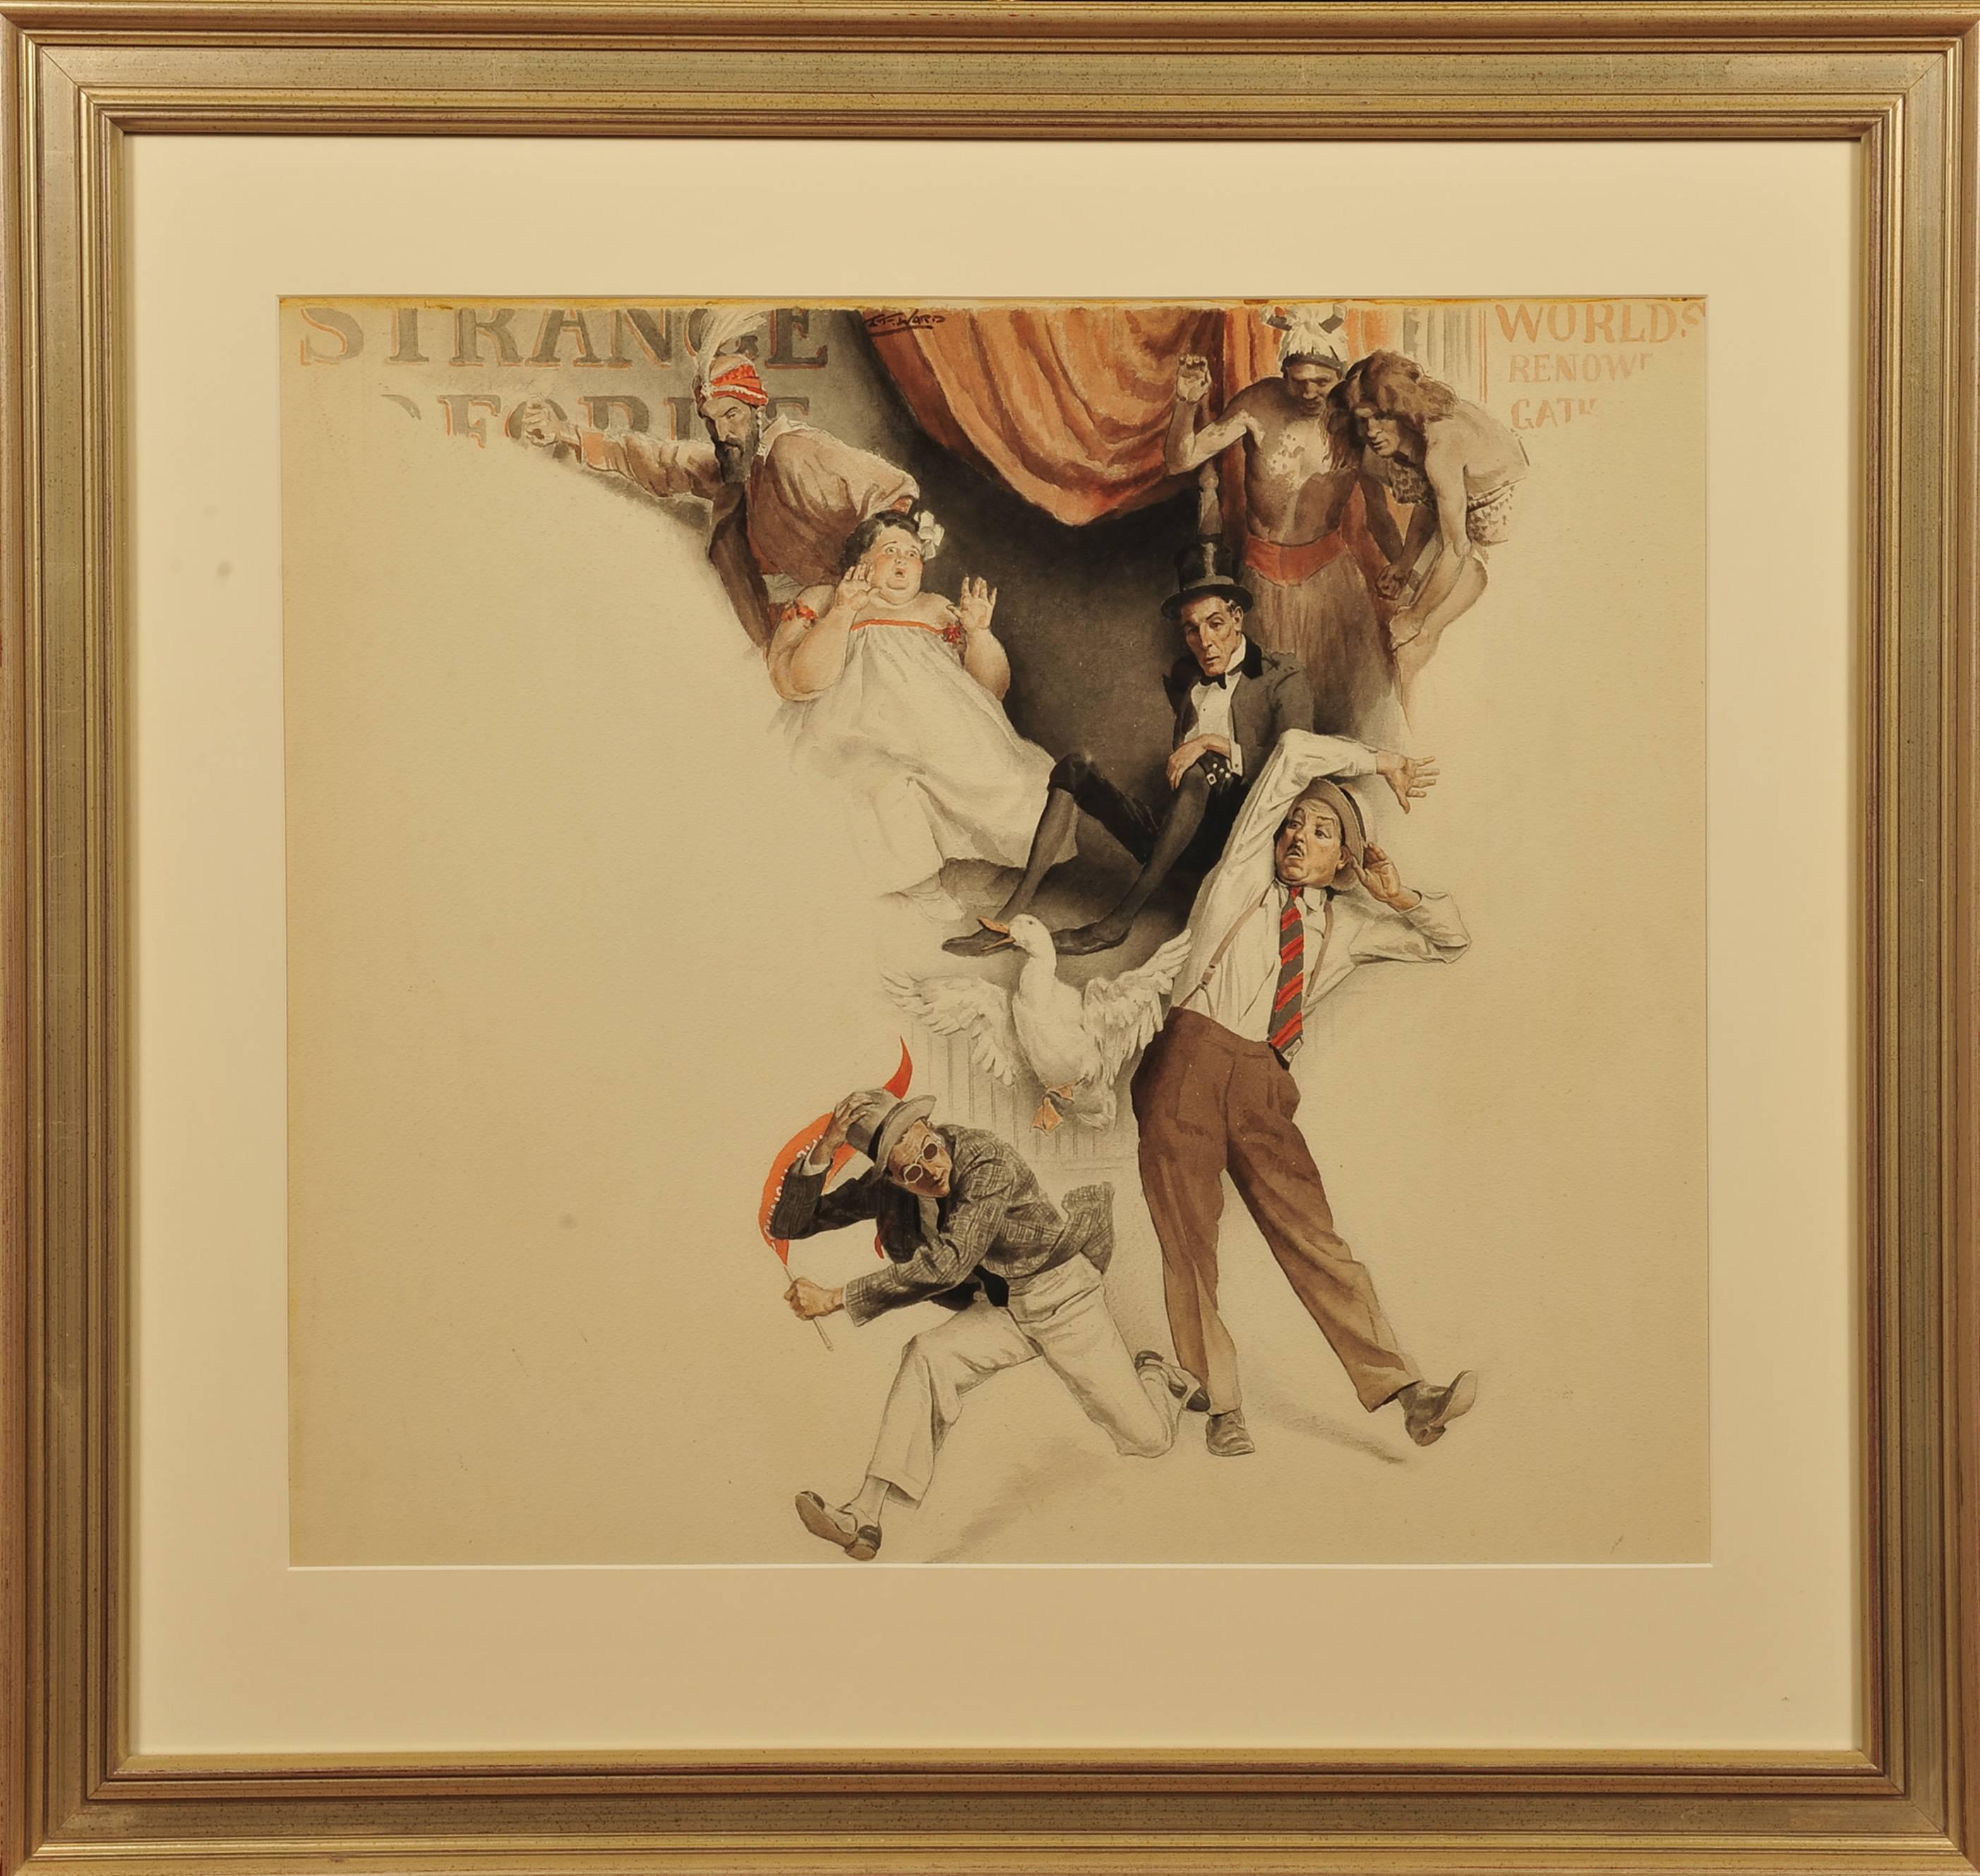 The Circus Freak Show - Painting by Edmund Ward